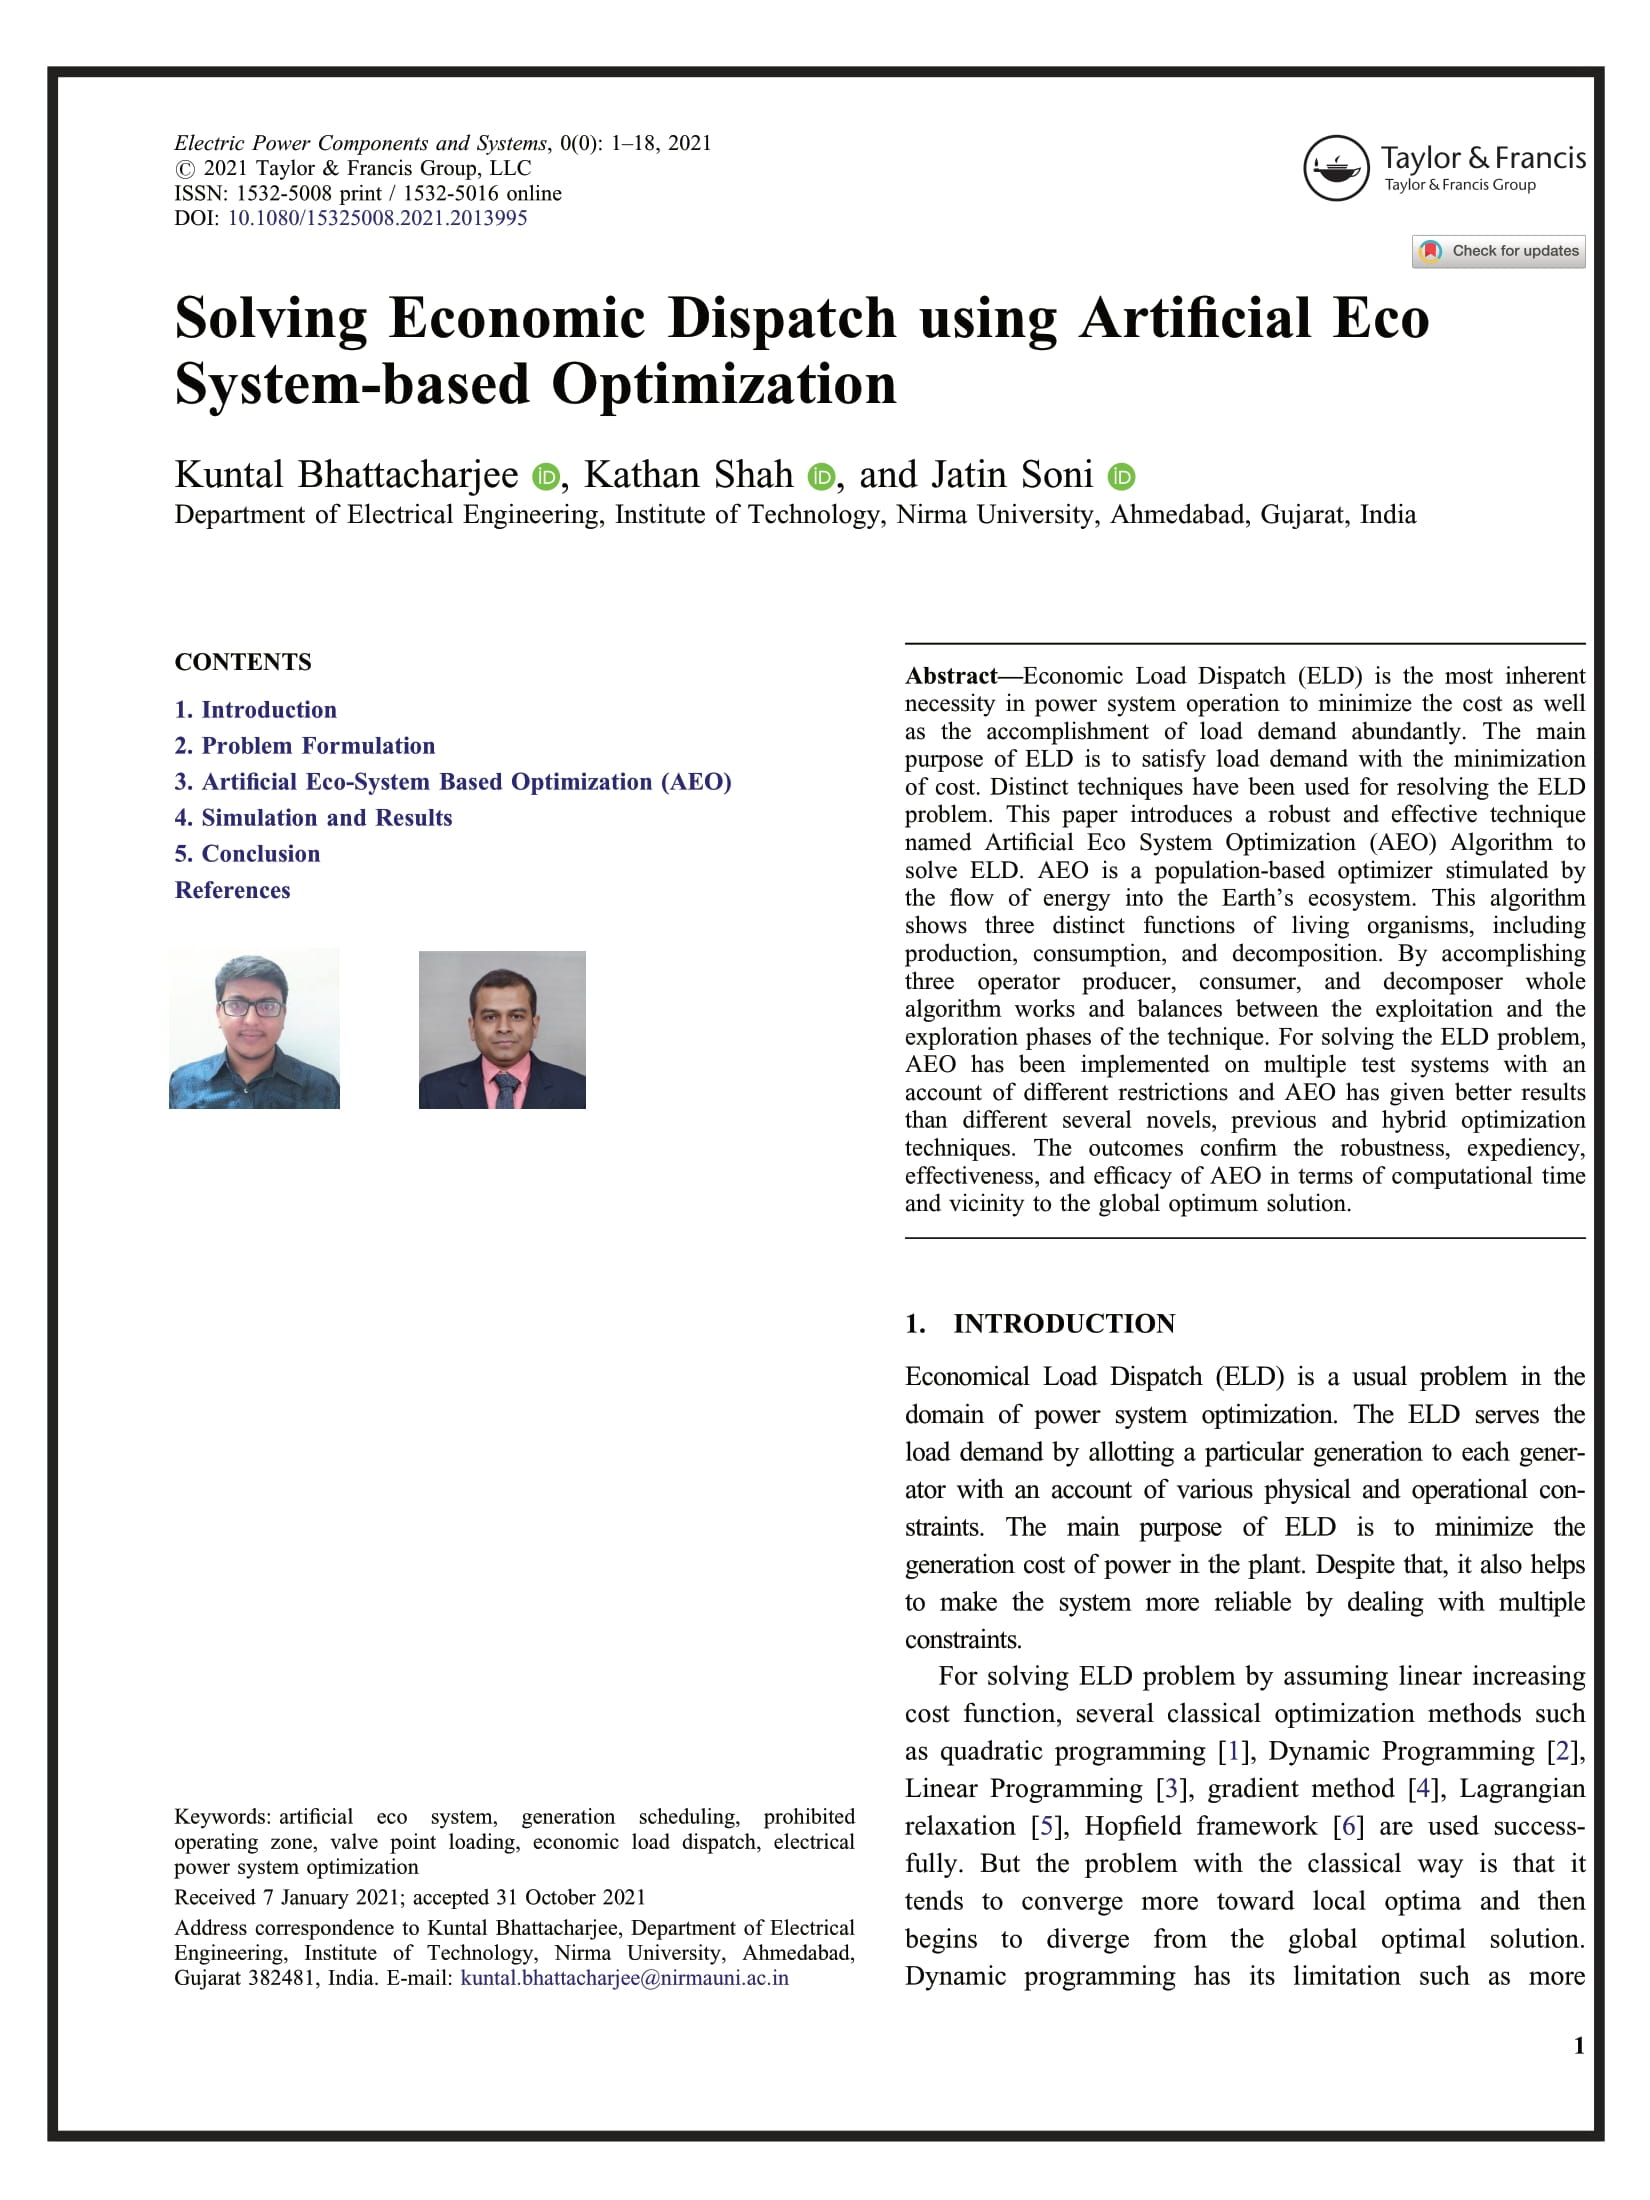 Solving Economic Dispatch using Artificial Eco System-based Optimization